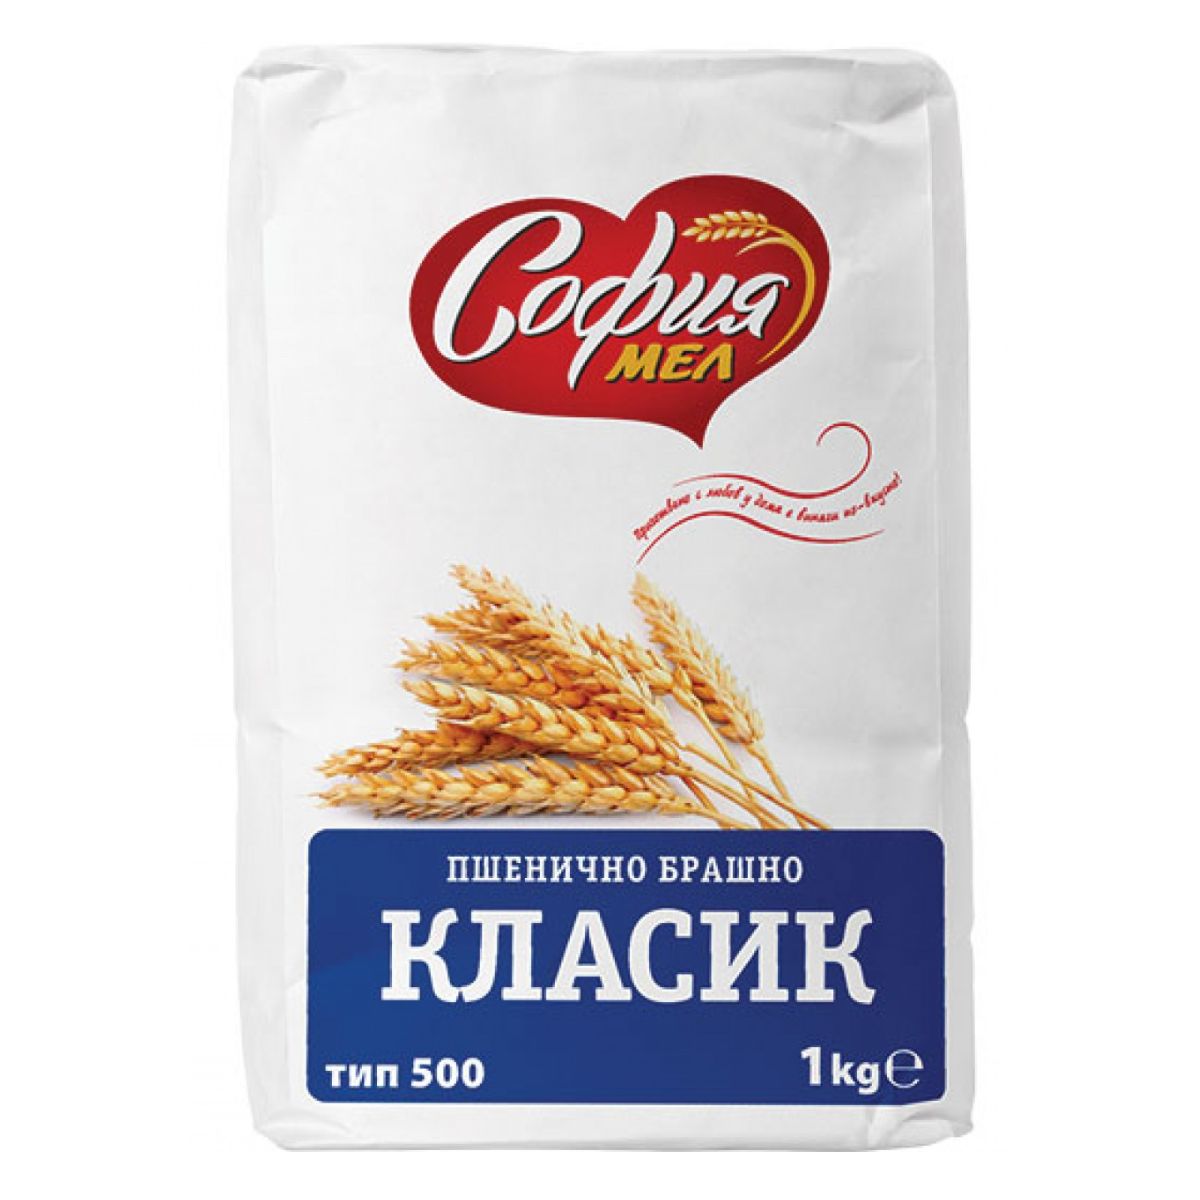 A bag of Sofia - Classic Flour - 1kg with wheat on it.